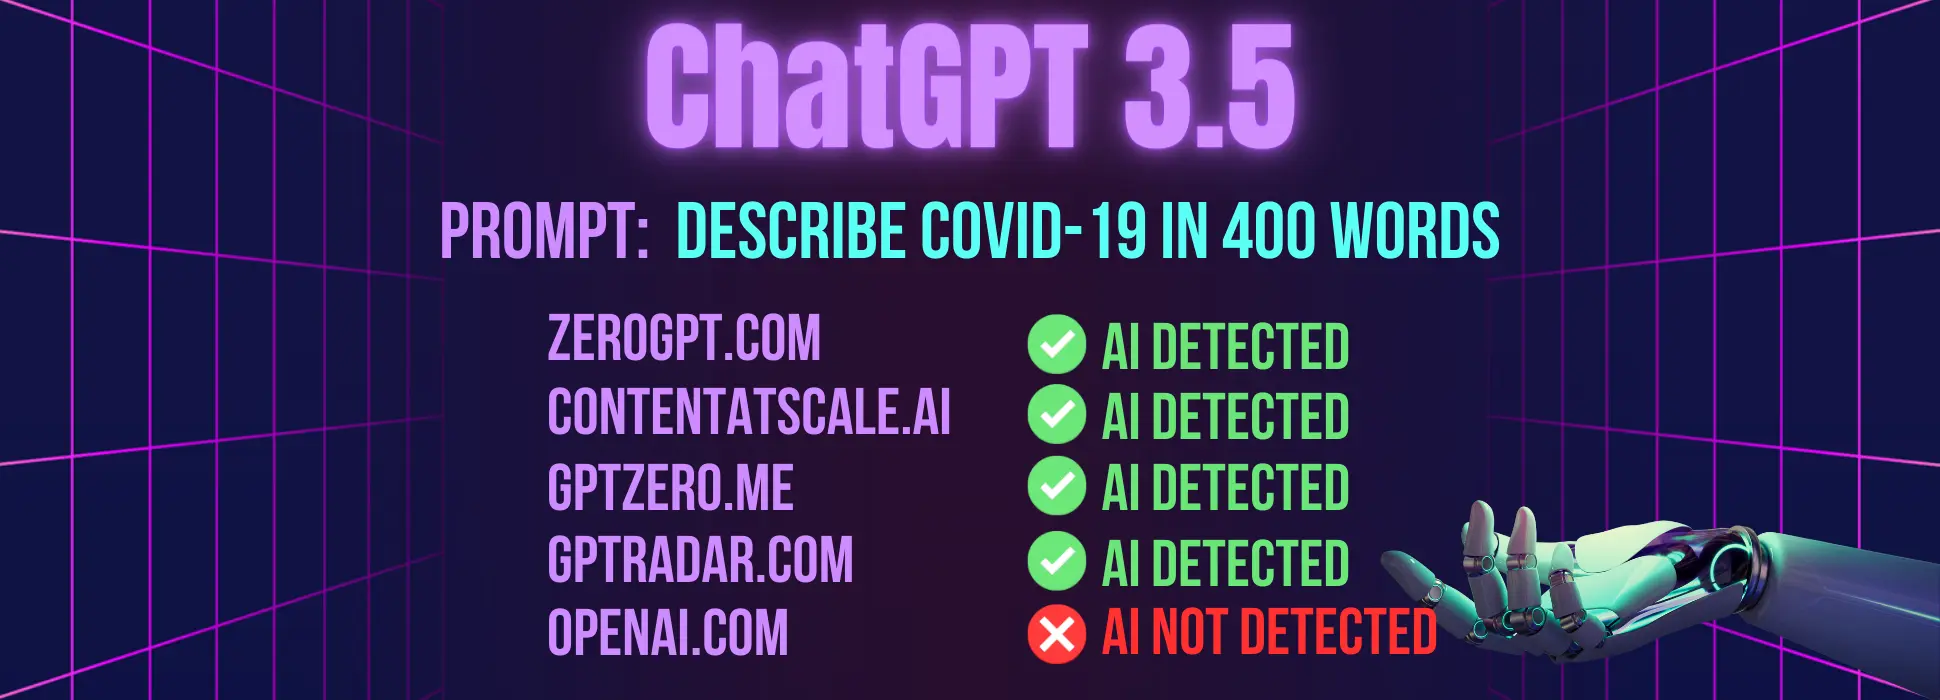 ChatGPT 3.5 results for prompt #2